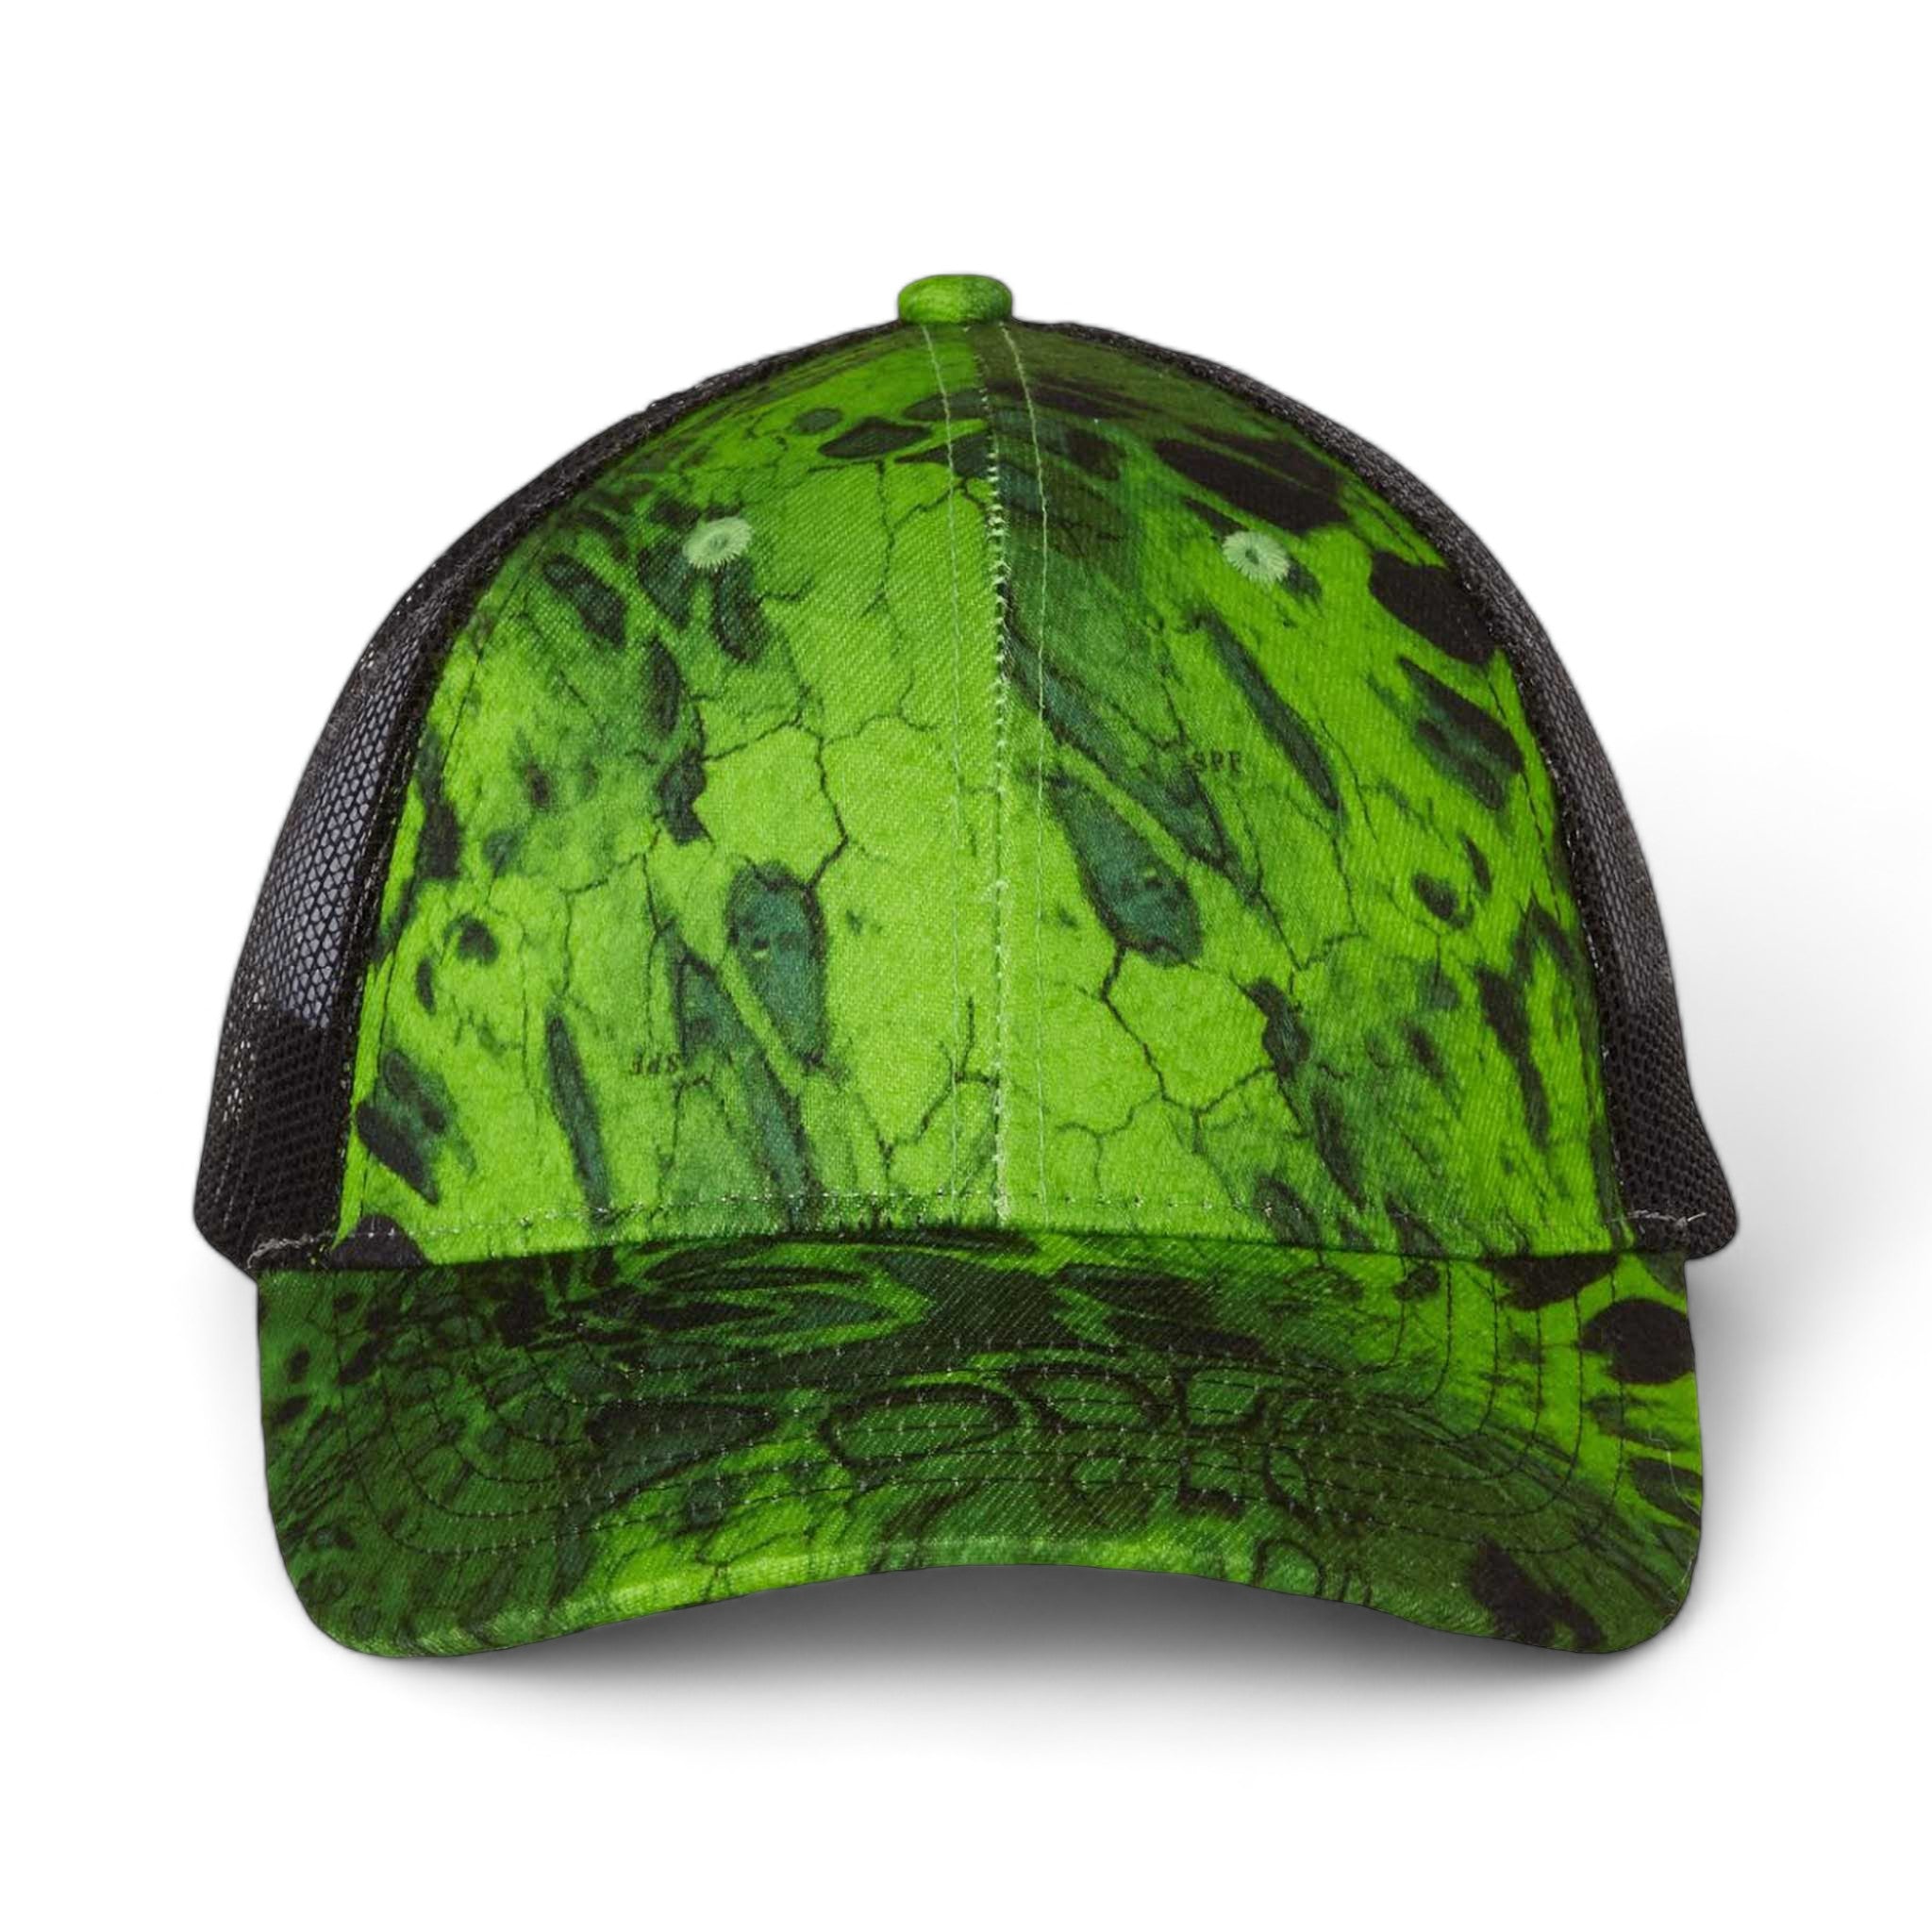 Front view of Kati LC5M custom hat in prym1 amped green and black